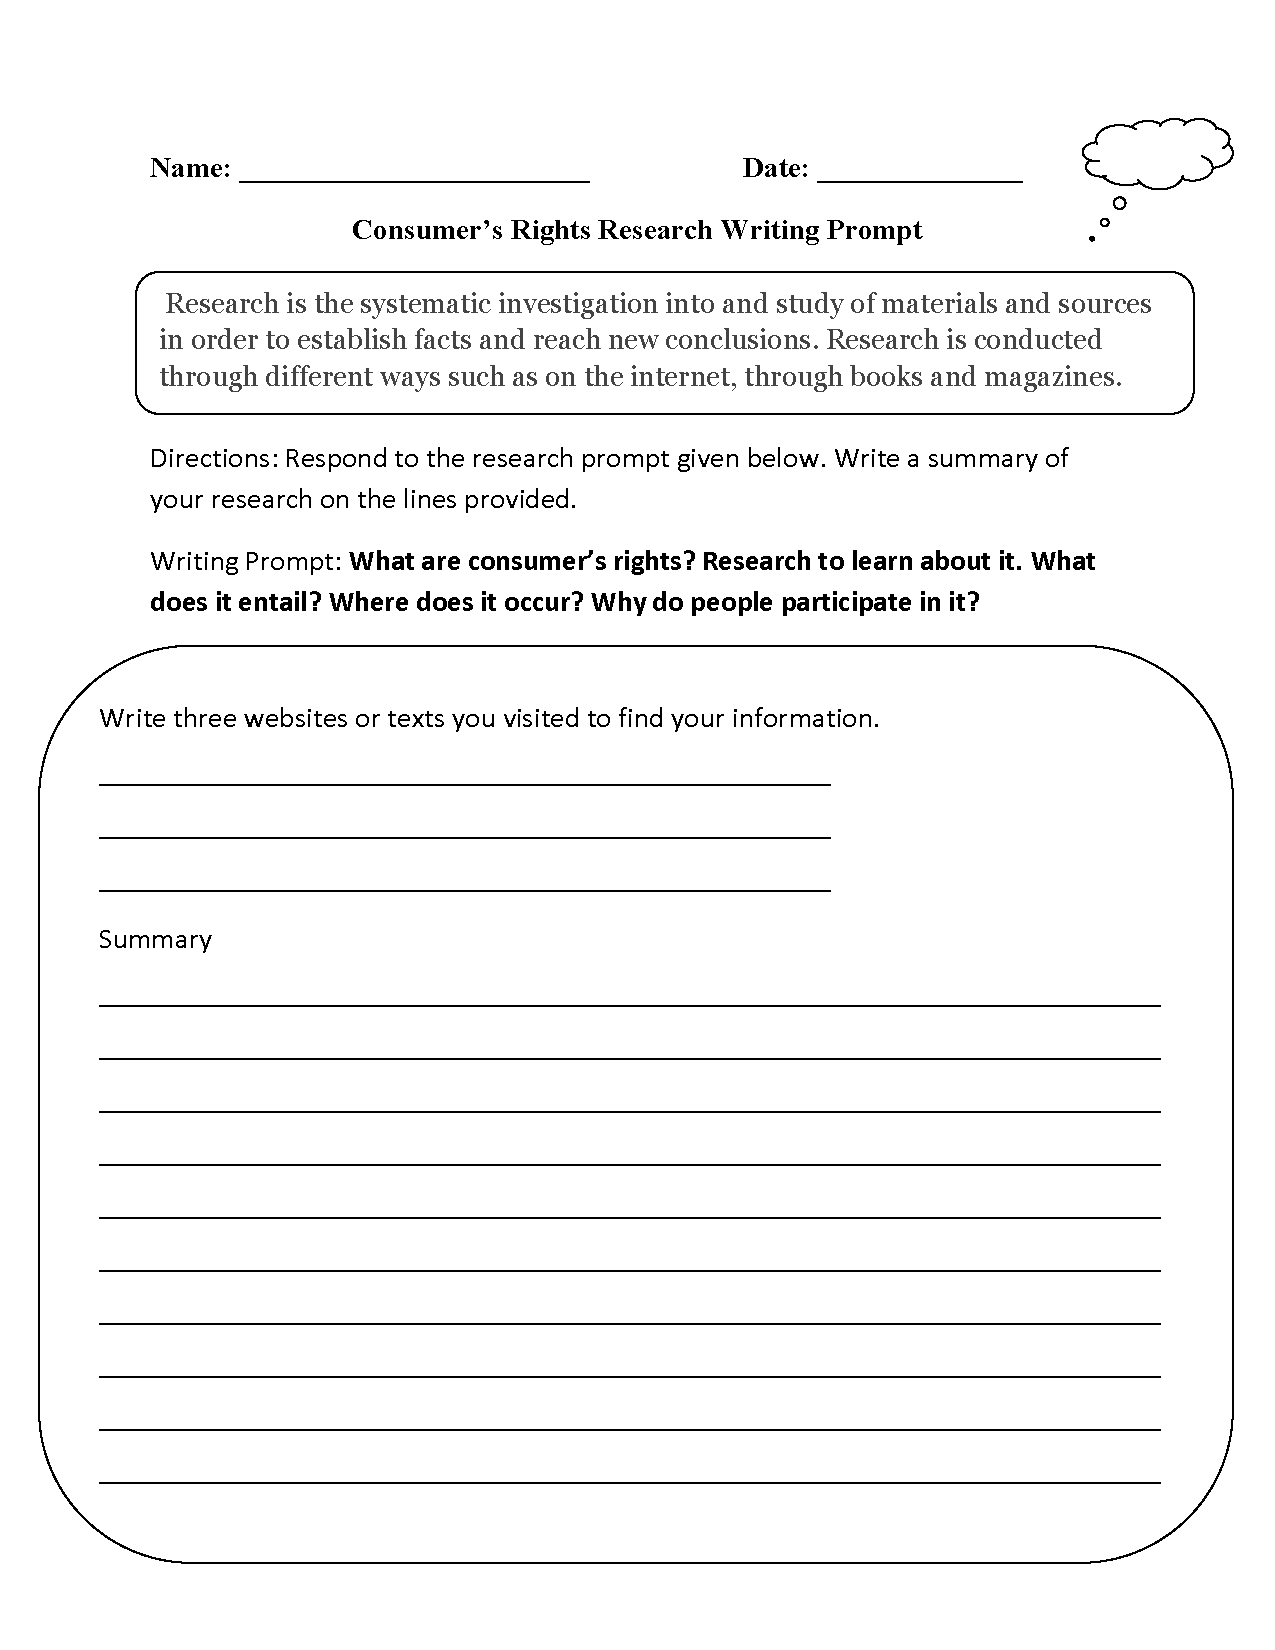 Consumer's Rights Research Writing Prompts Worksheets